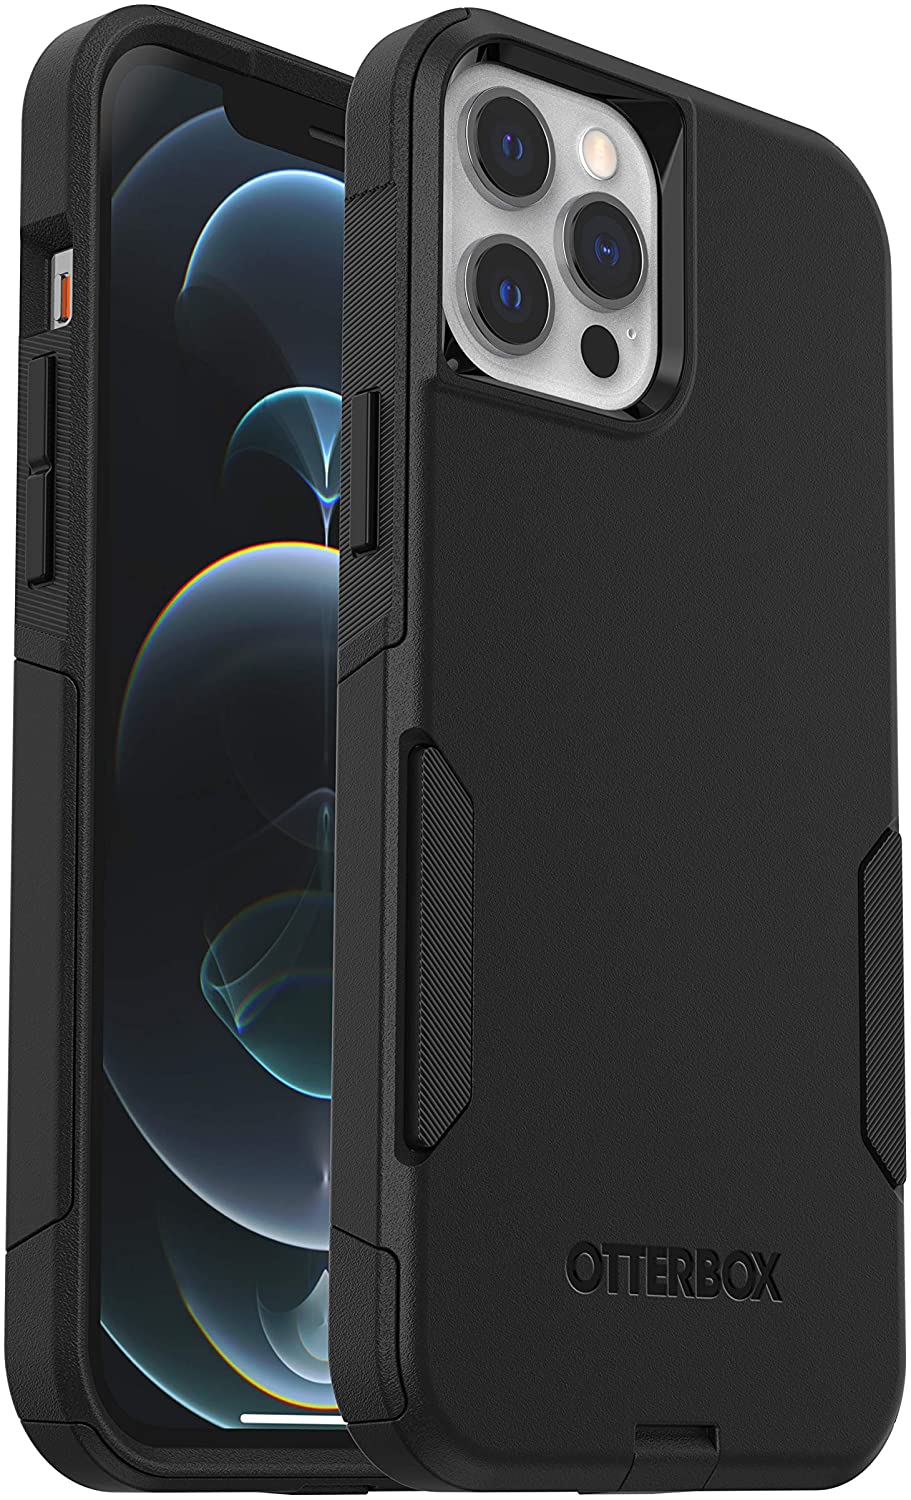 OtterBox COMMUTER SERIES Case for Apple iPhone 12 Pro Max - Black (New)